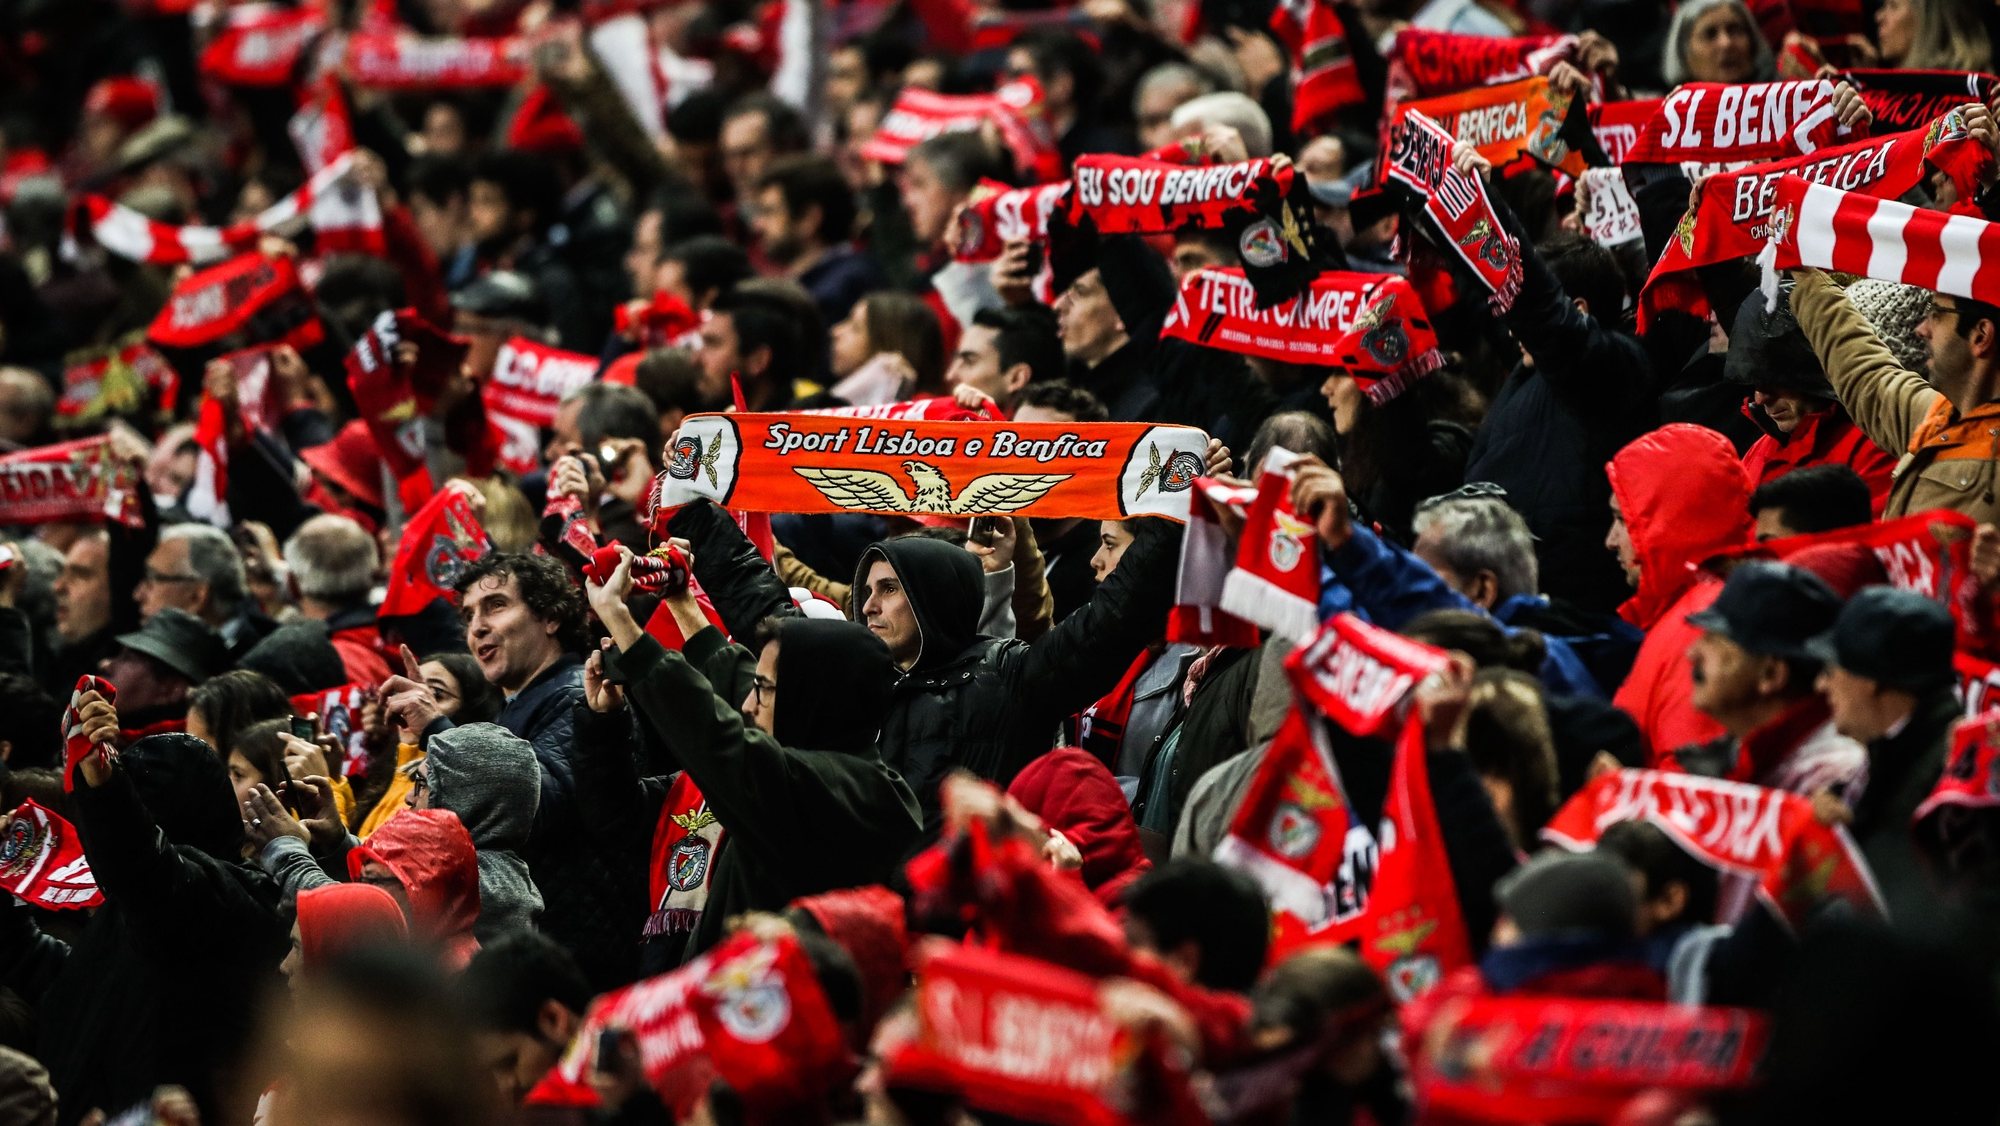 Benfica&#039;s supporters celebrate after their team won against Nacional (10-0) at the end of the Portuguese First League soccer match held at Luz Stadium in Lisbon, Portugal, 10 February 2019. MARIO CRUZ/LUSA